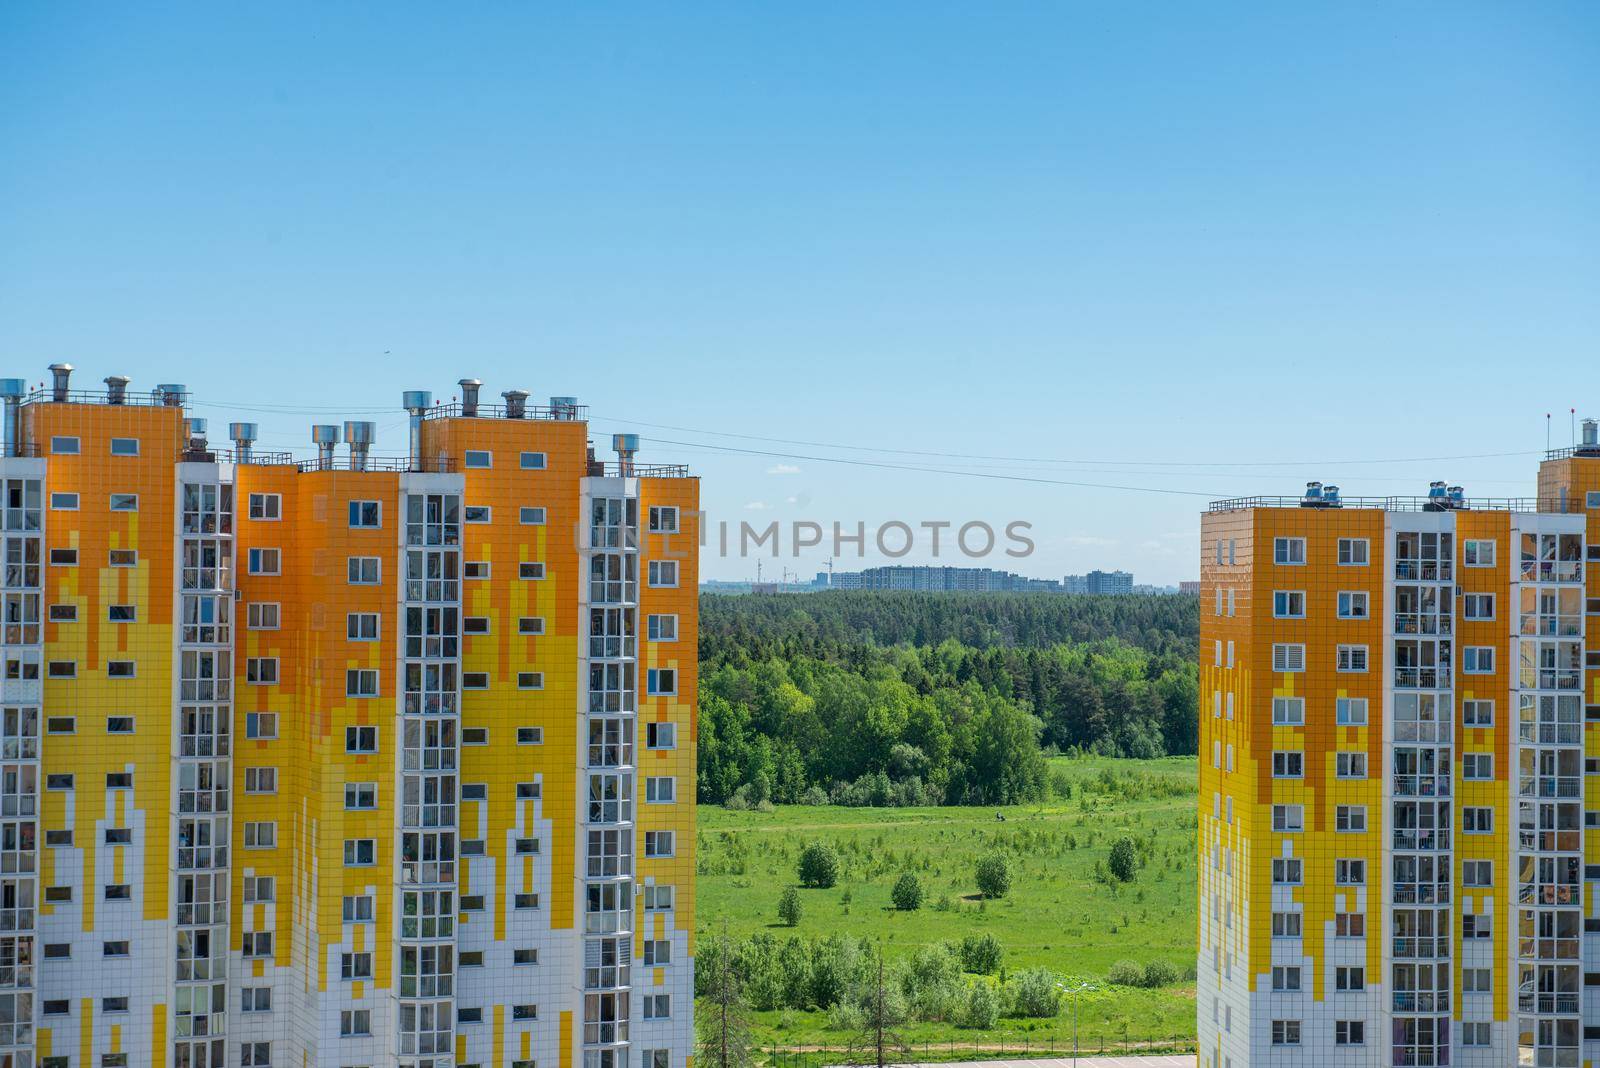 two high-rise residential buildings